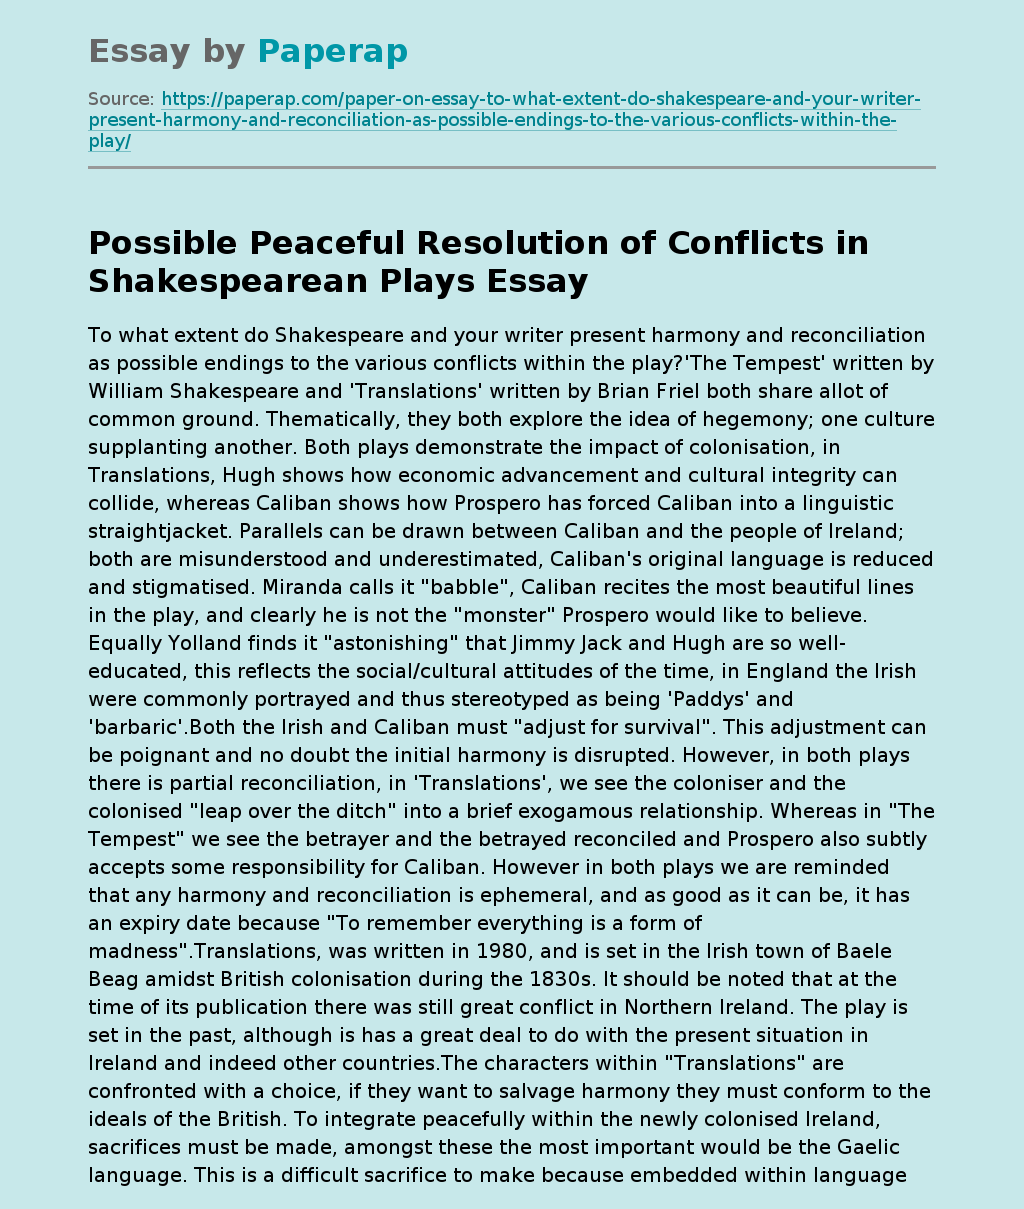 Possible Peaceful Resolution of Conflicts in Shakespearean Plays